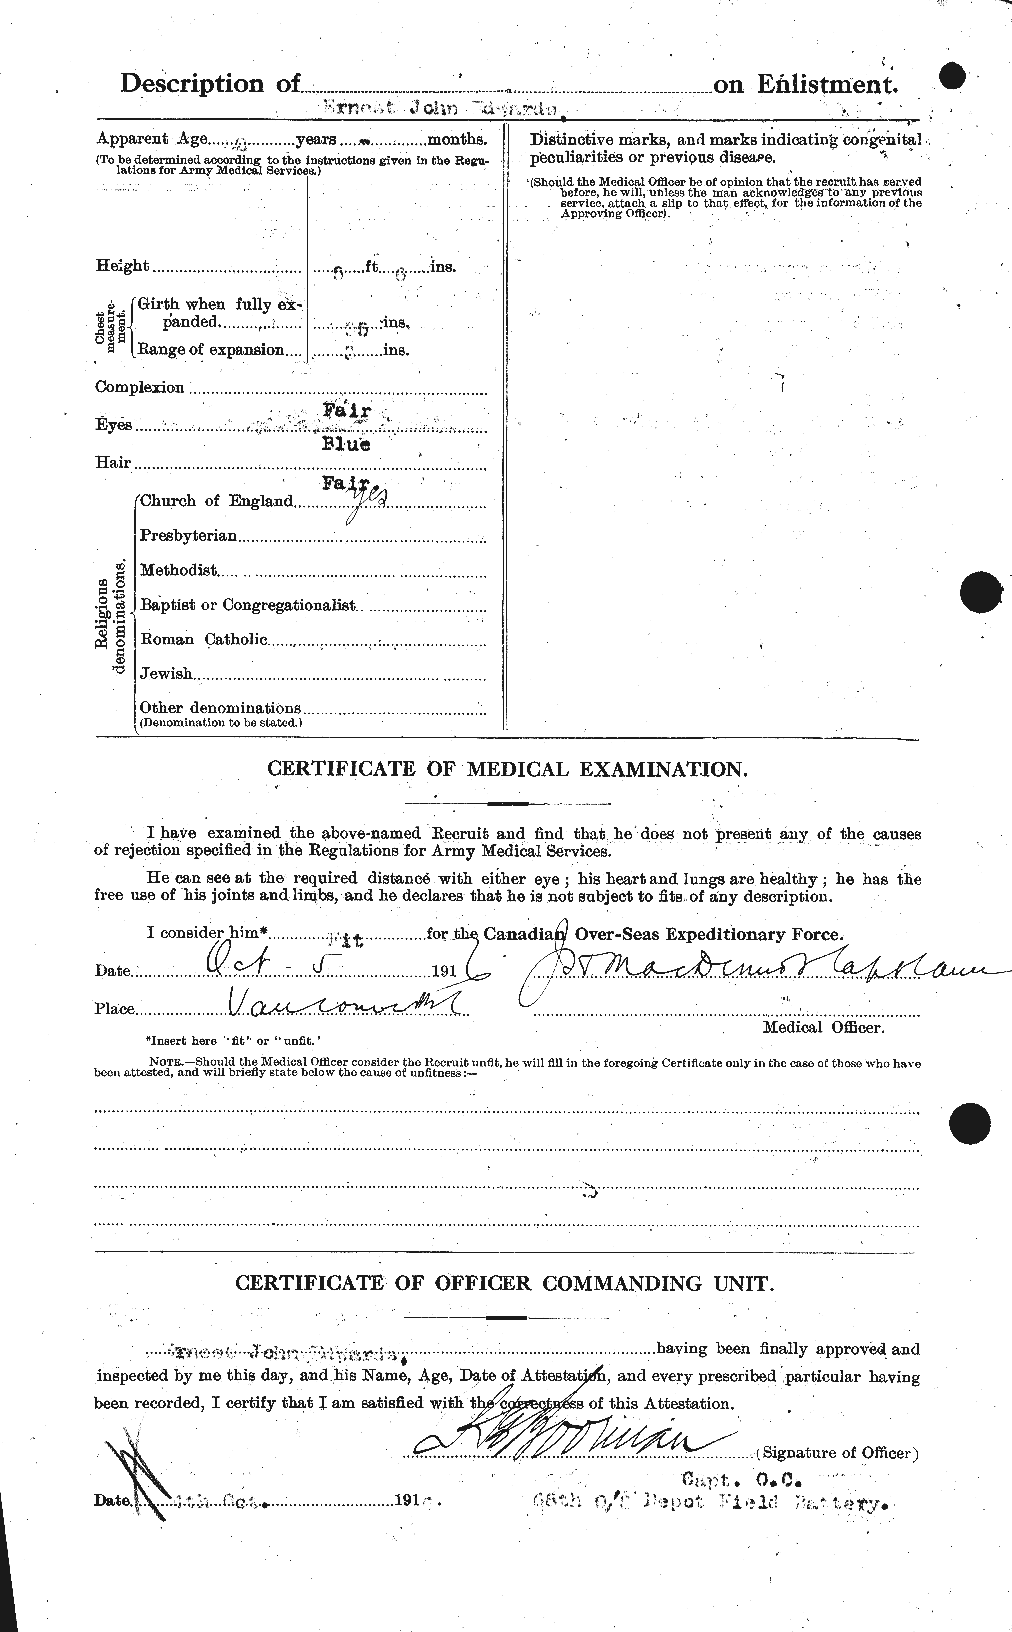 Personnel Records of the First World War - CEF 309012b